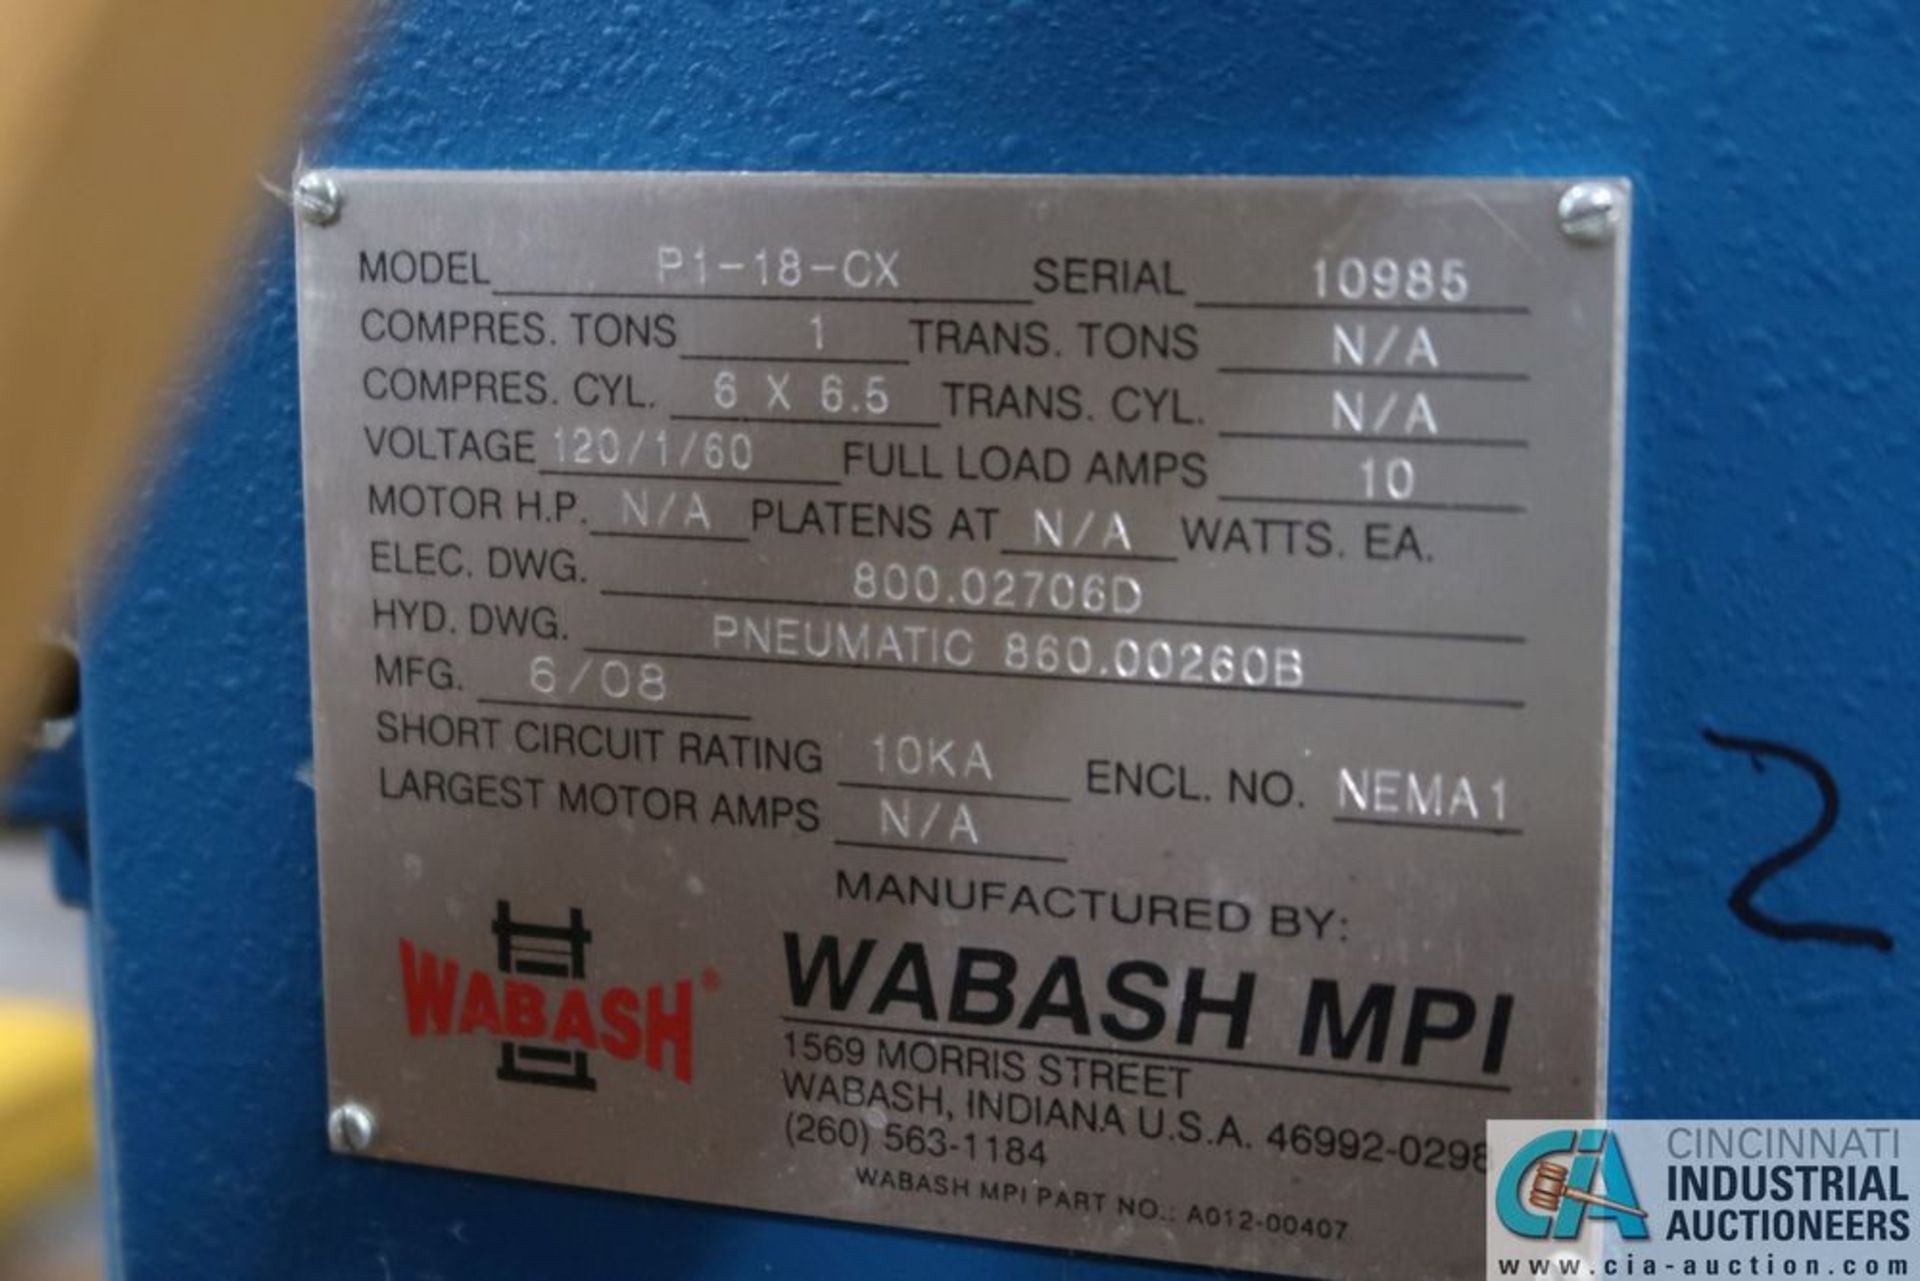 WABASH MPI MODEL P1-18-CX PNEUMATIC COMPRESSION MOLDING PRESS; S/N 10985 **Loading Fee Due $100.00** - Image 8 of 8